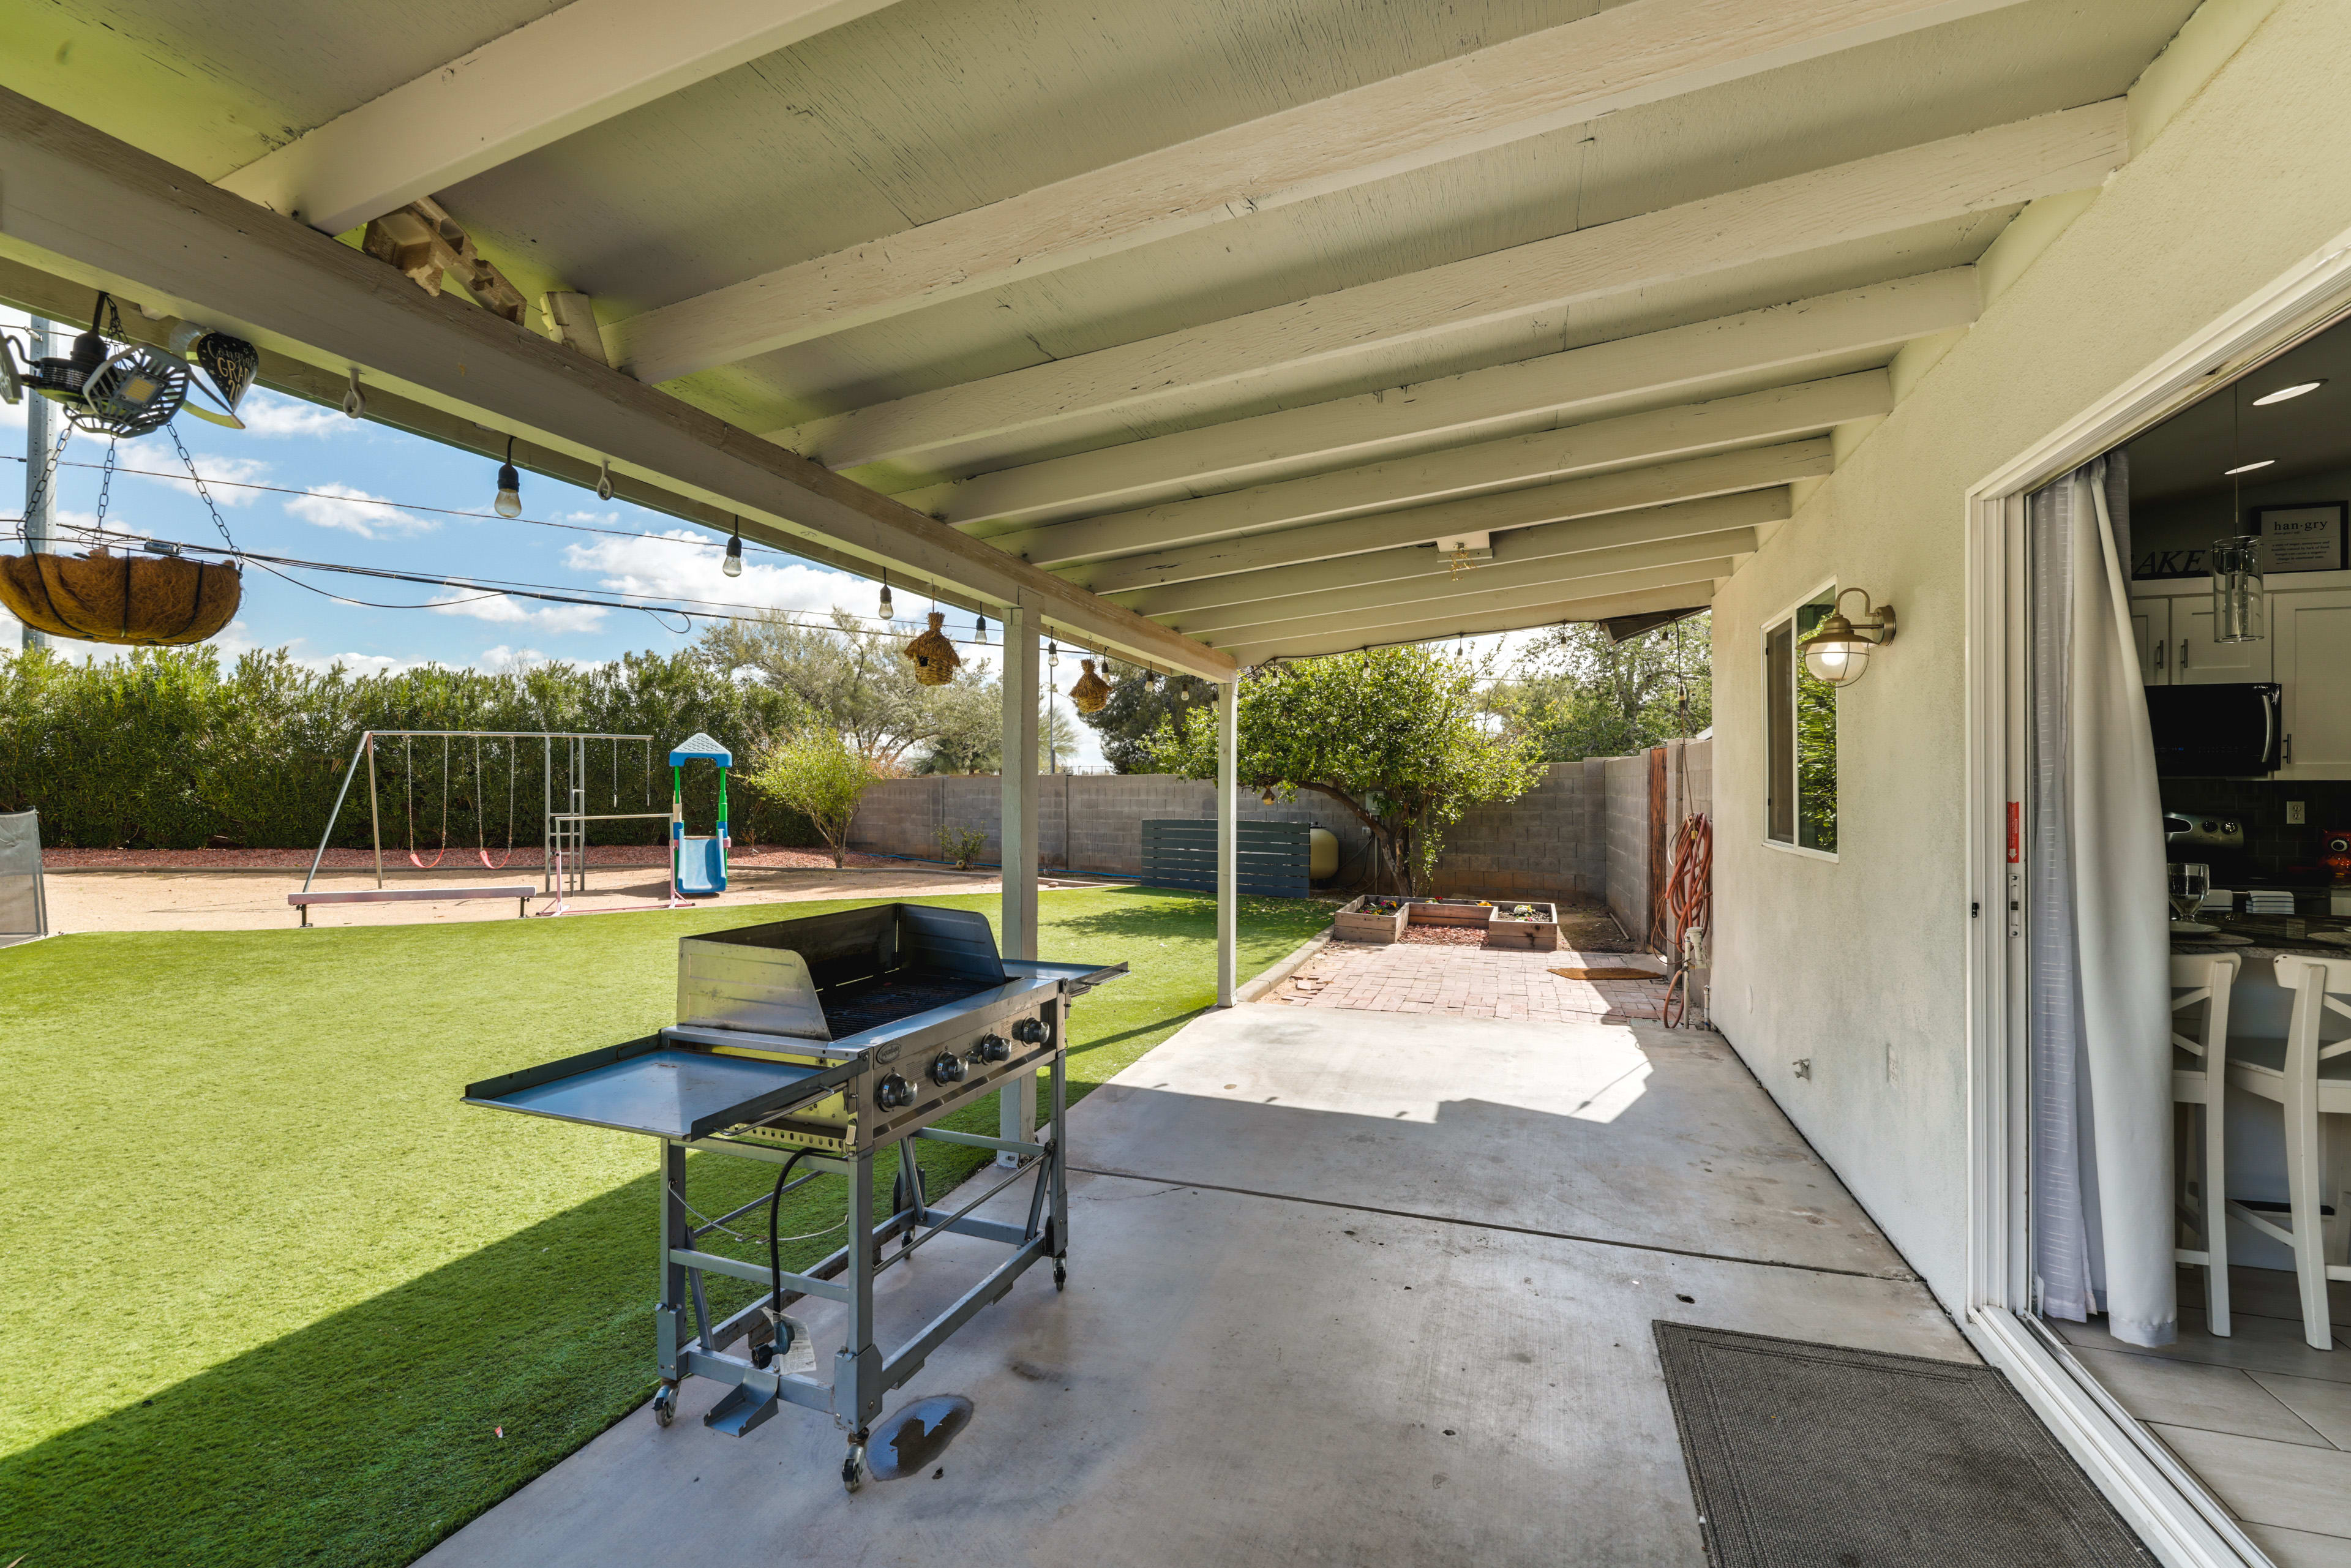 Private Backyard Area | Outdoor Pool | Swing Set | BBQ Grill